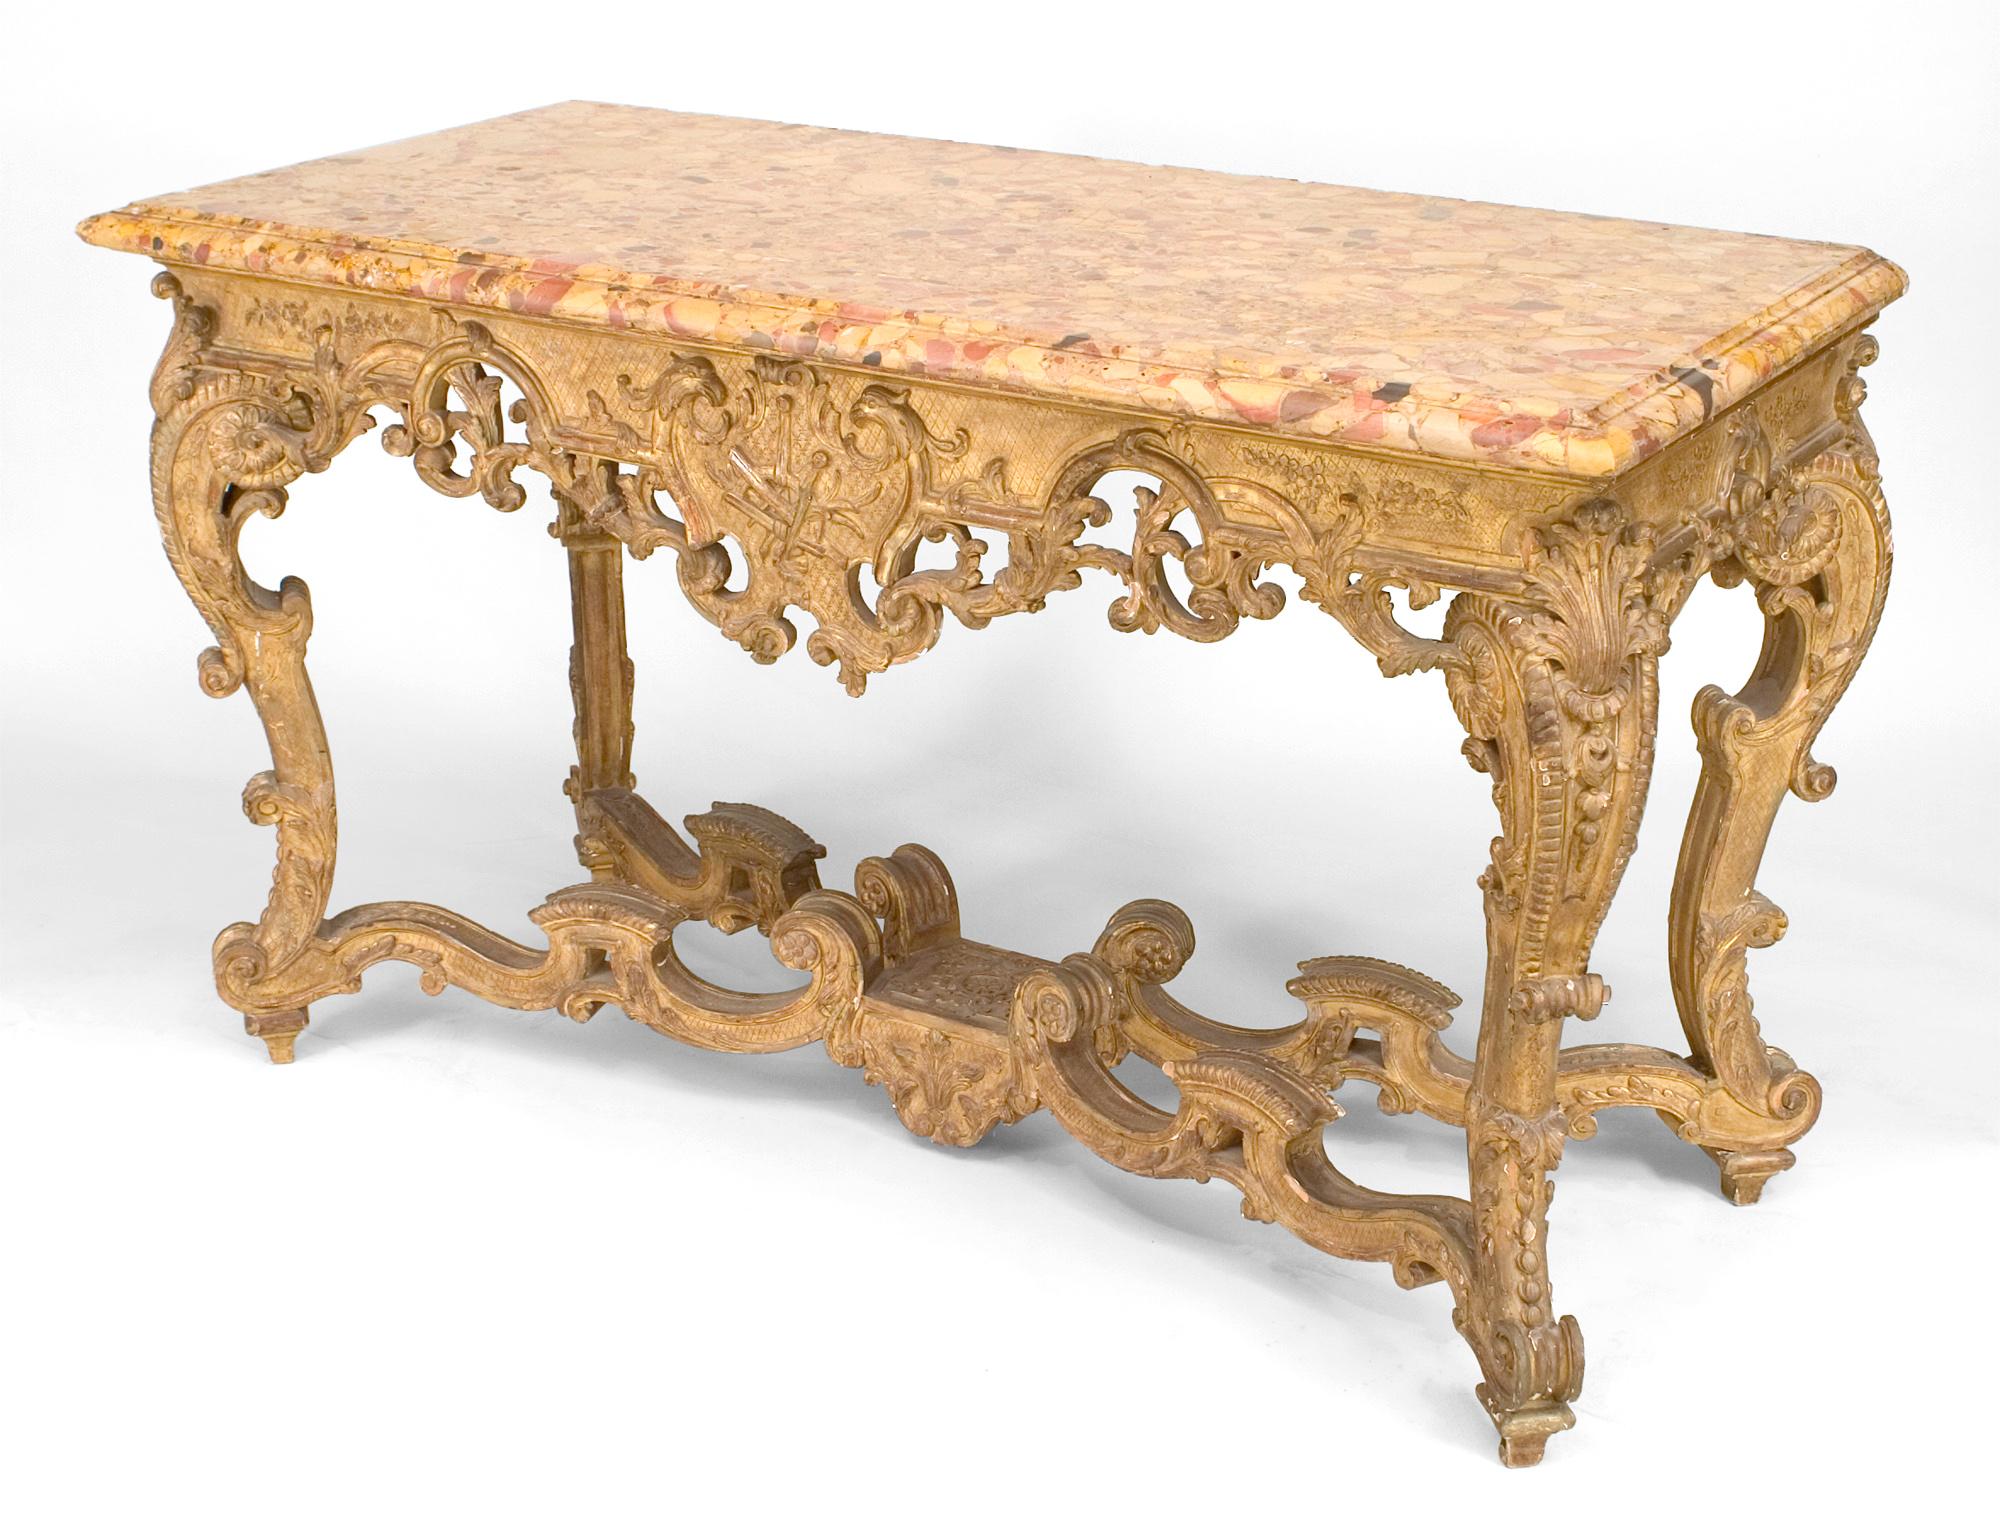 Continental (Possibly German 19th Century) gilt rectangular console table with a carved and filigree apron and stretcher connected with 4 scrolls & breche stepped up marble top.
